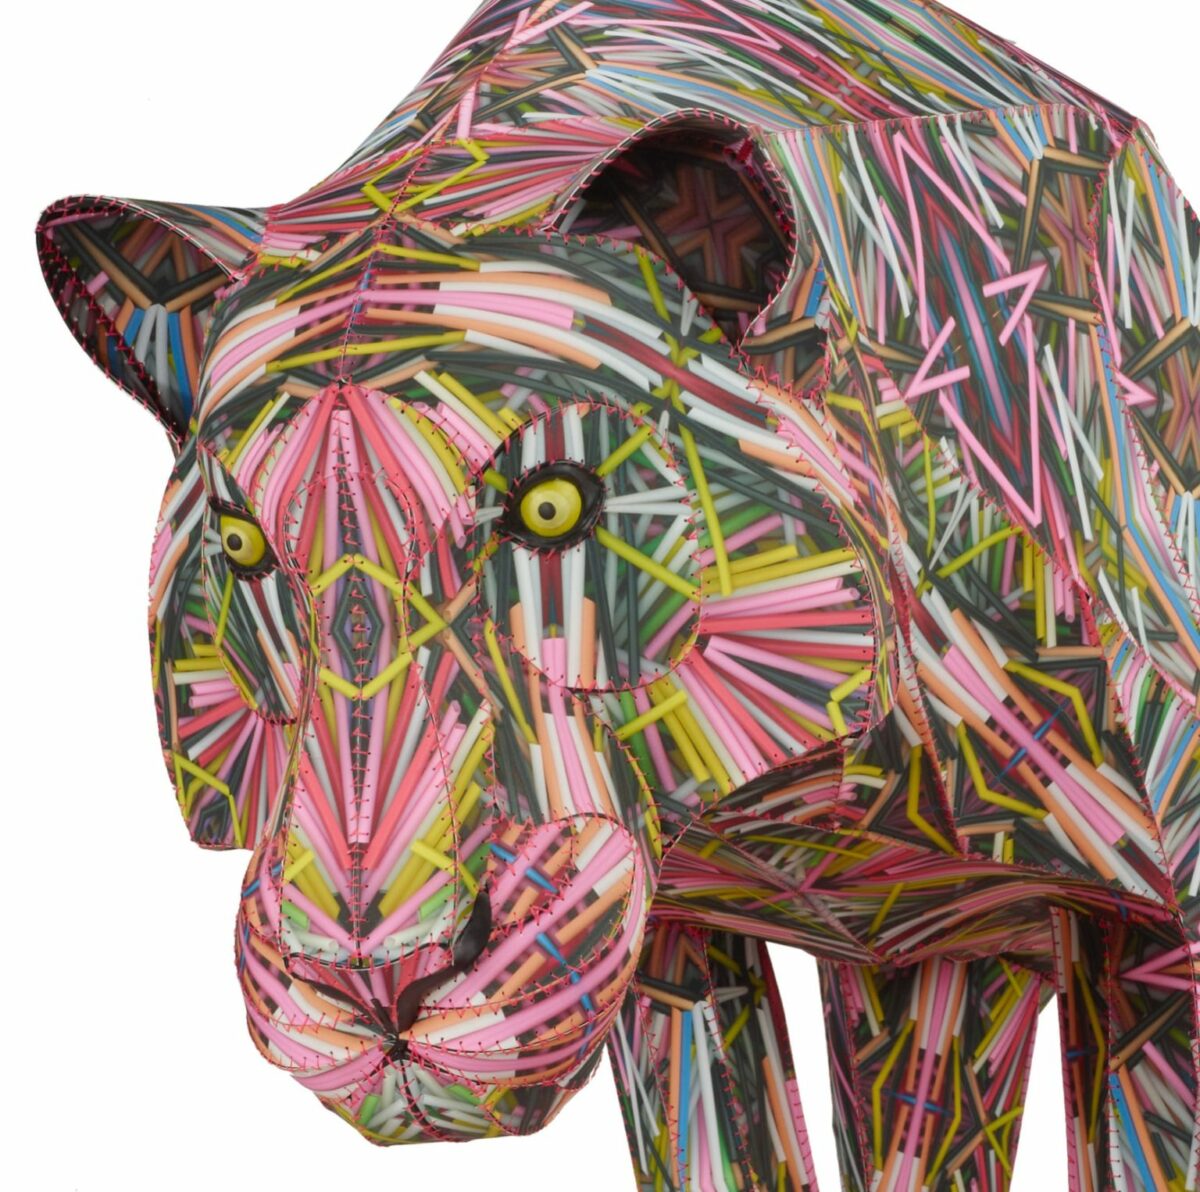 Stunning Three Dimensional Animal Paper Sculptures Decorated With Colorful Patterns By Anne Lemanski (6)